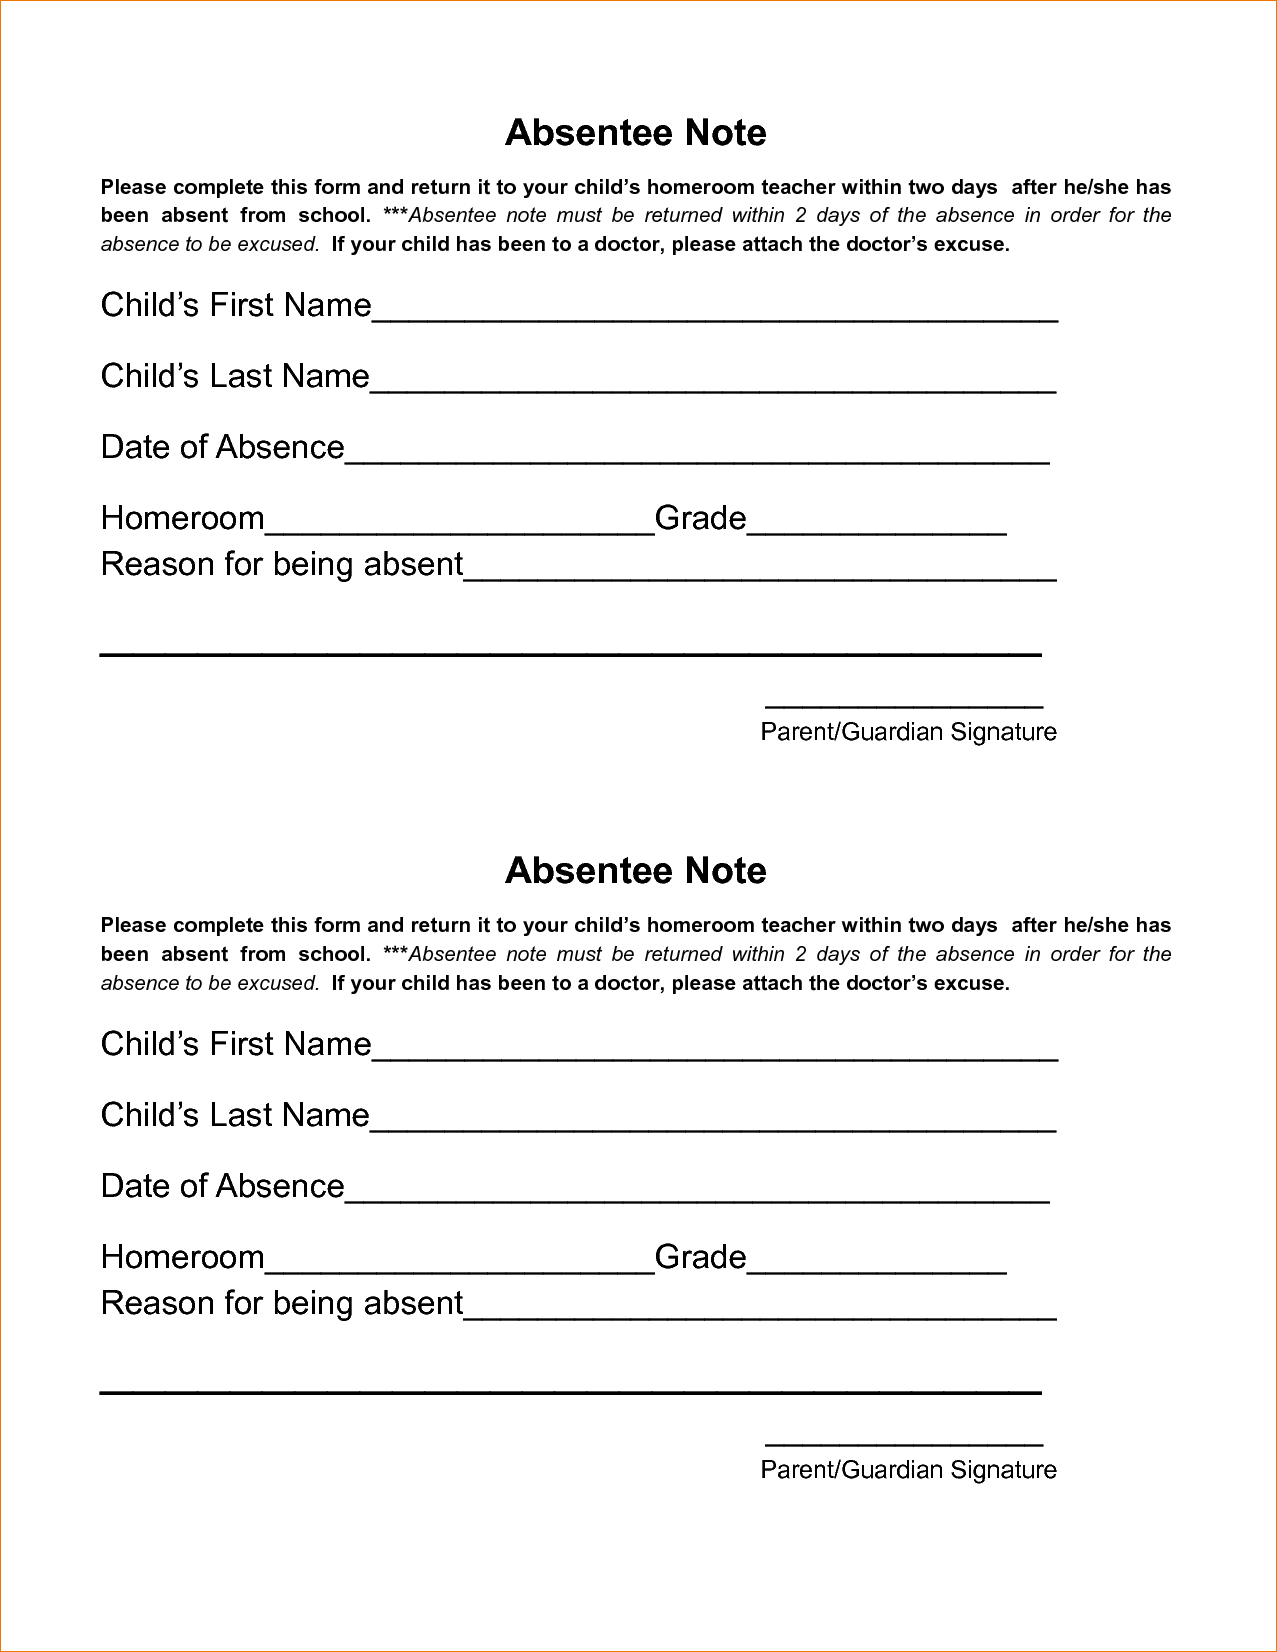 8 Free Printable Doctors Excuse For Workagenda Template Sample - Free Printable Doctors Excuse For School